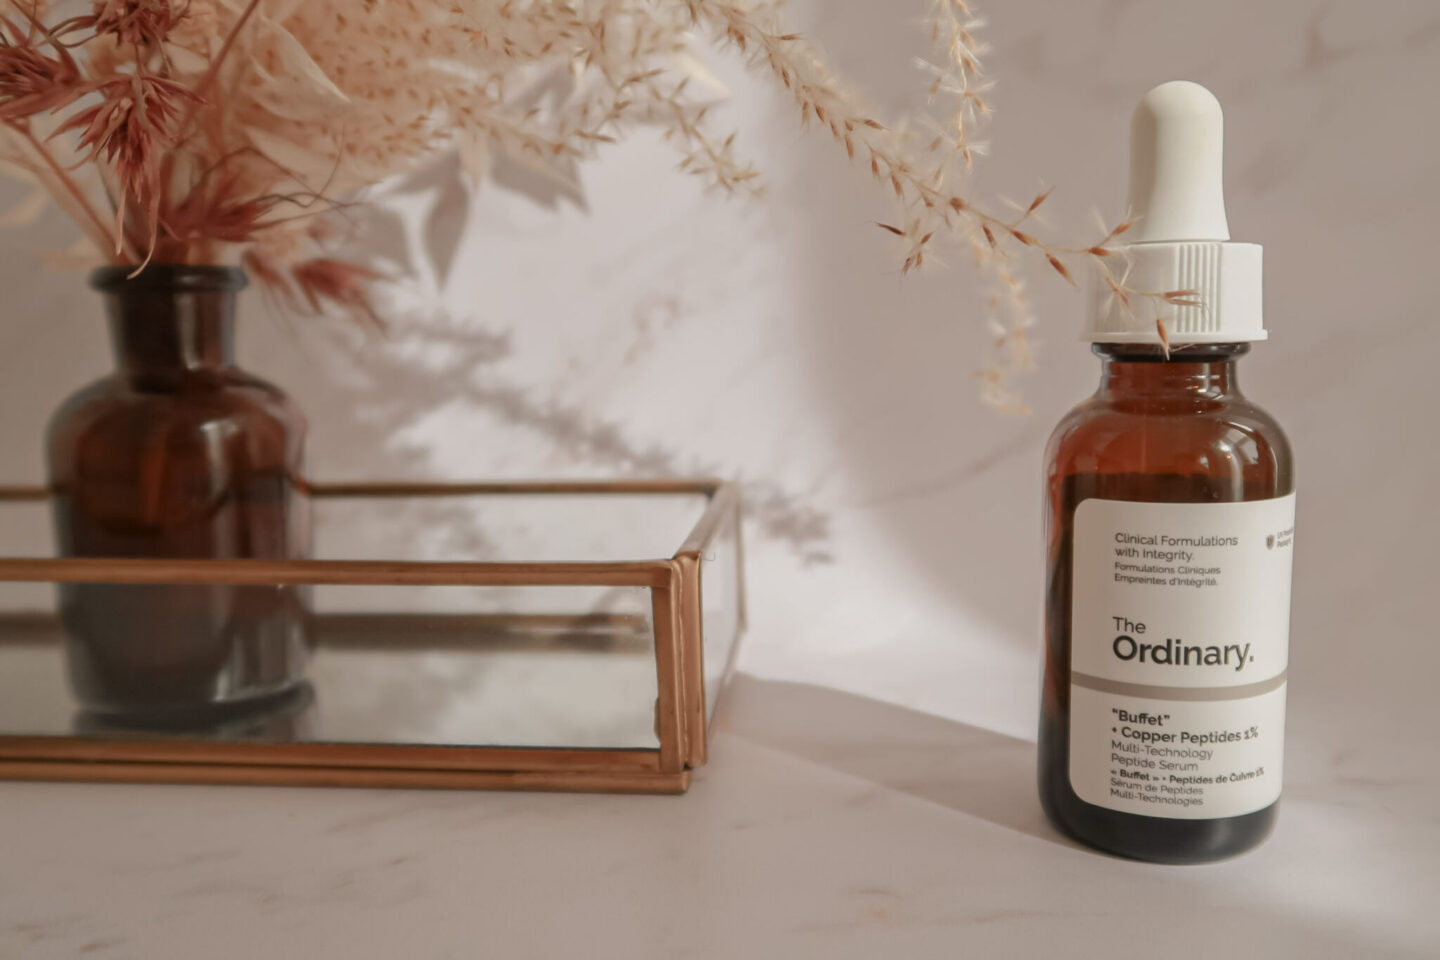 The Ordinary Buffet Peptides de Cuivre  #copperpeptides #theordinary #skincare #soindelapeau 